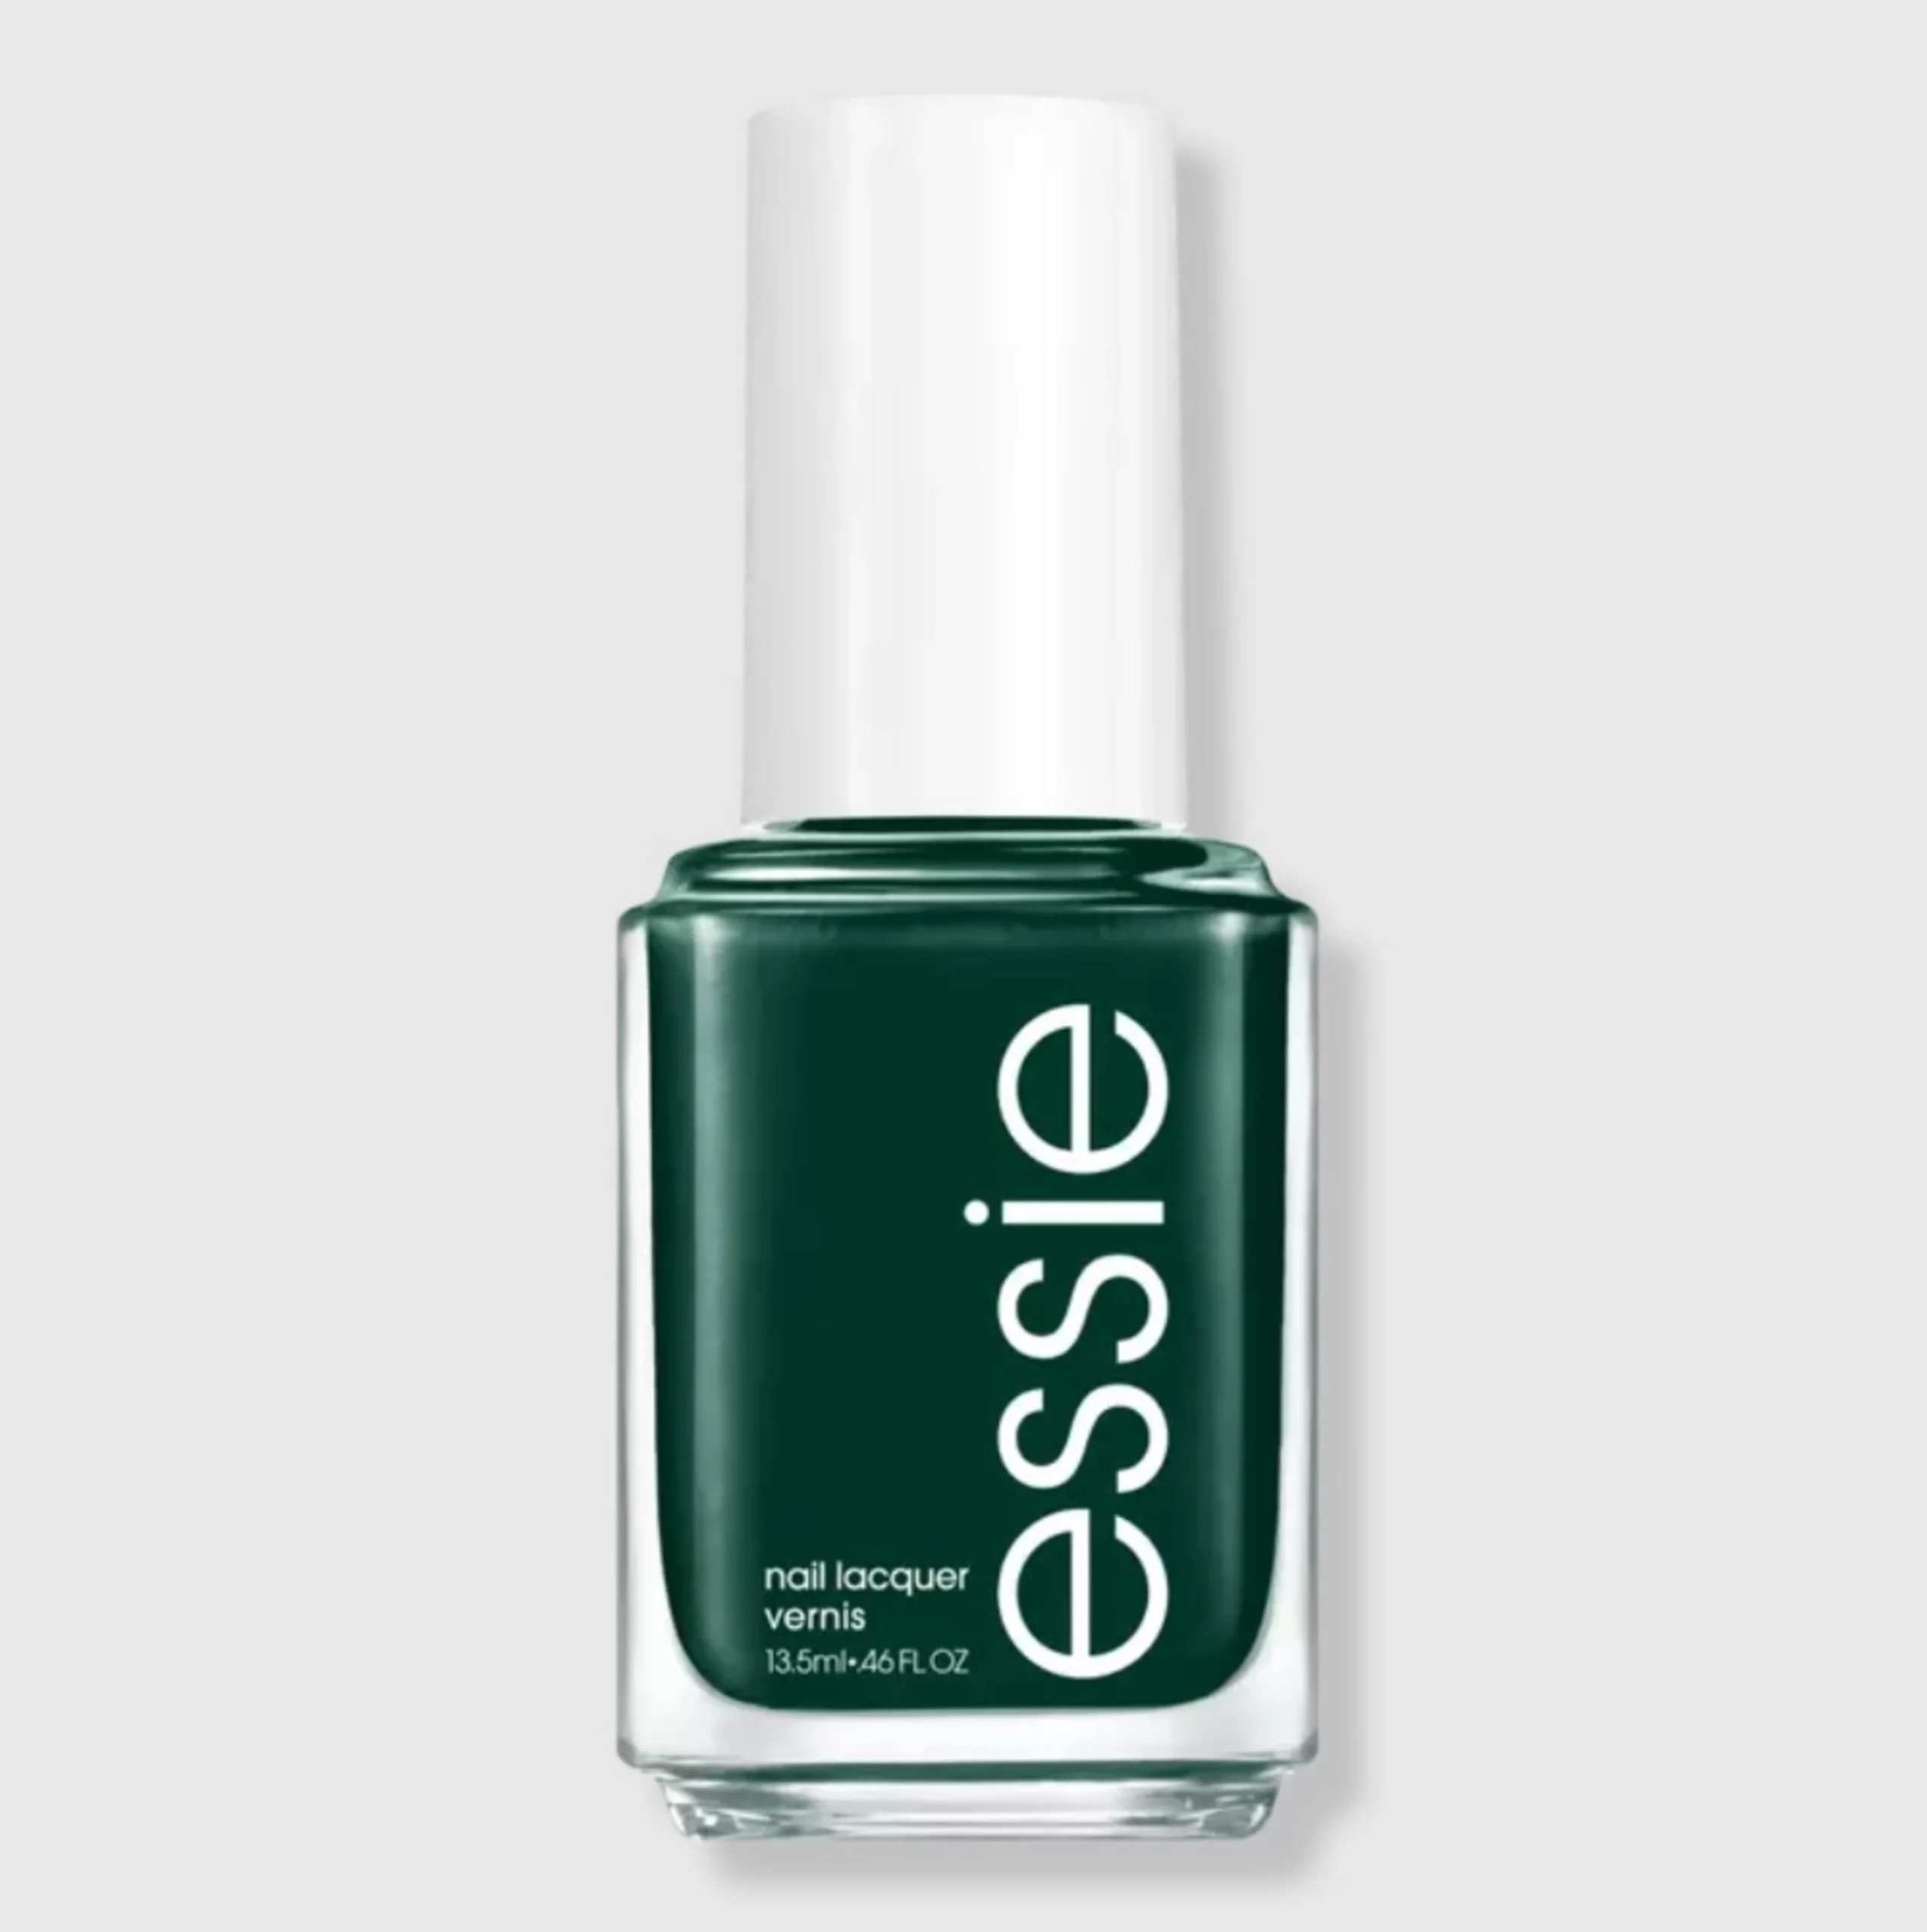 Essie Nail Polish in Off Topic